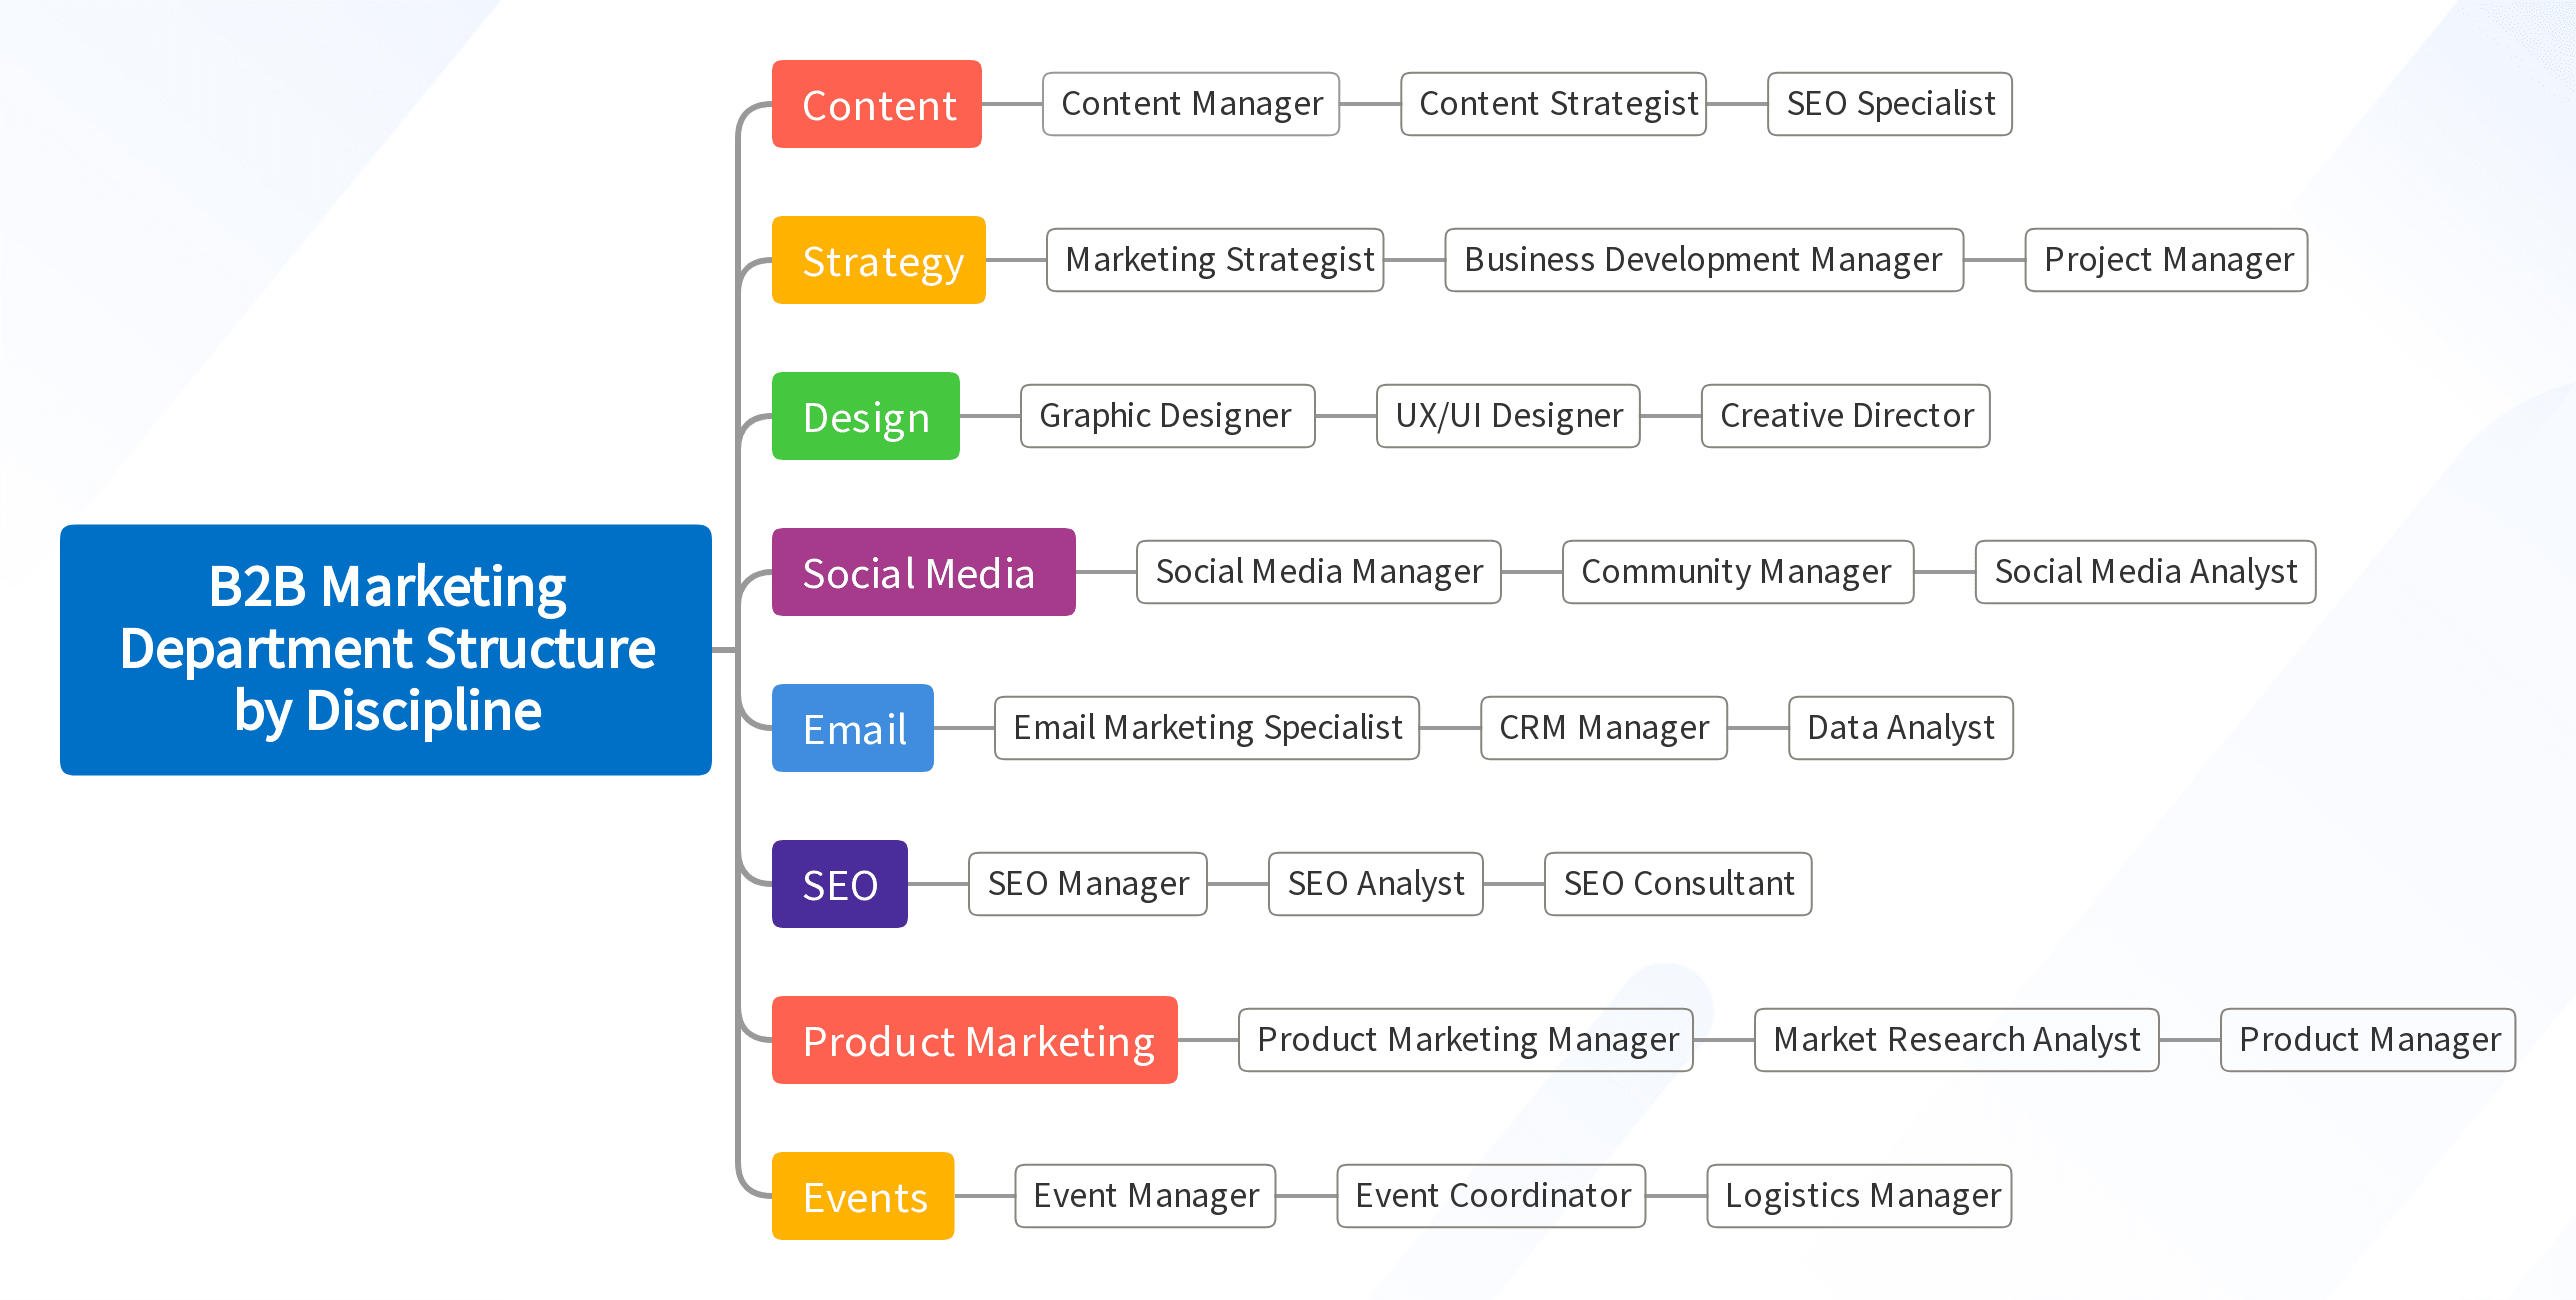 B2B Marketing Department Structure by Discipline